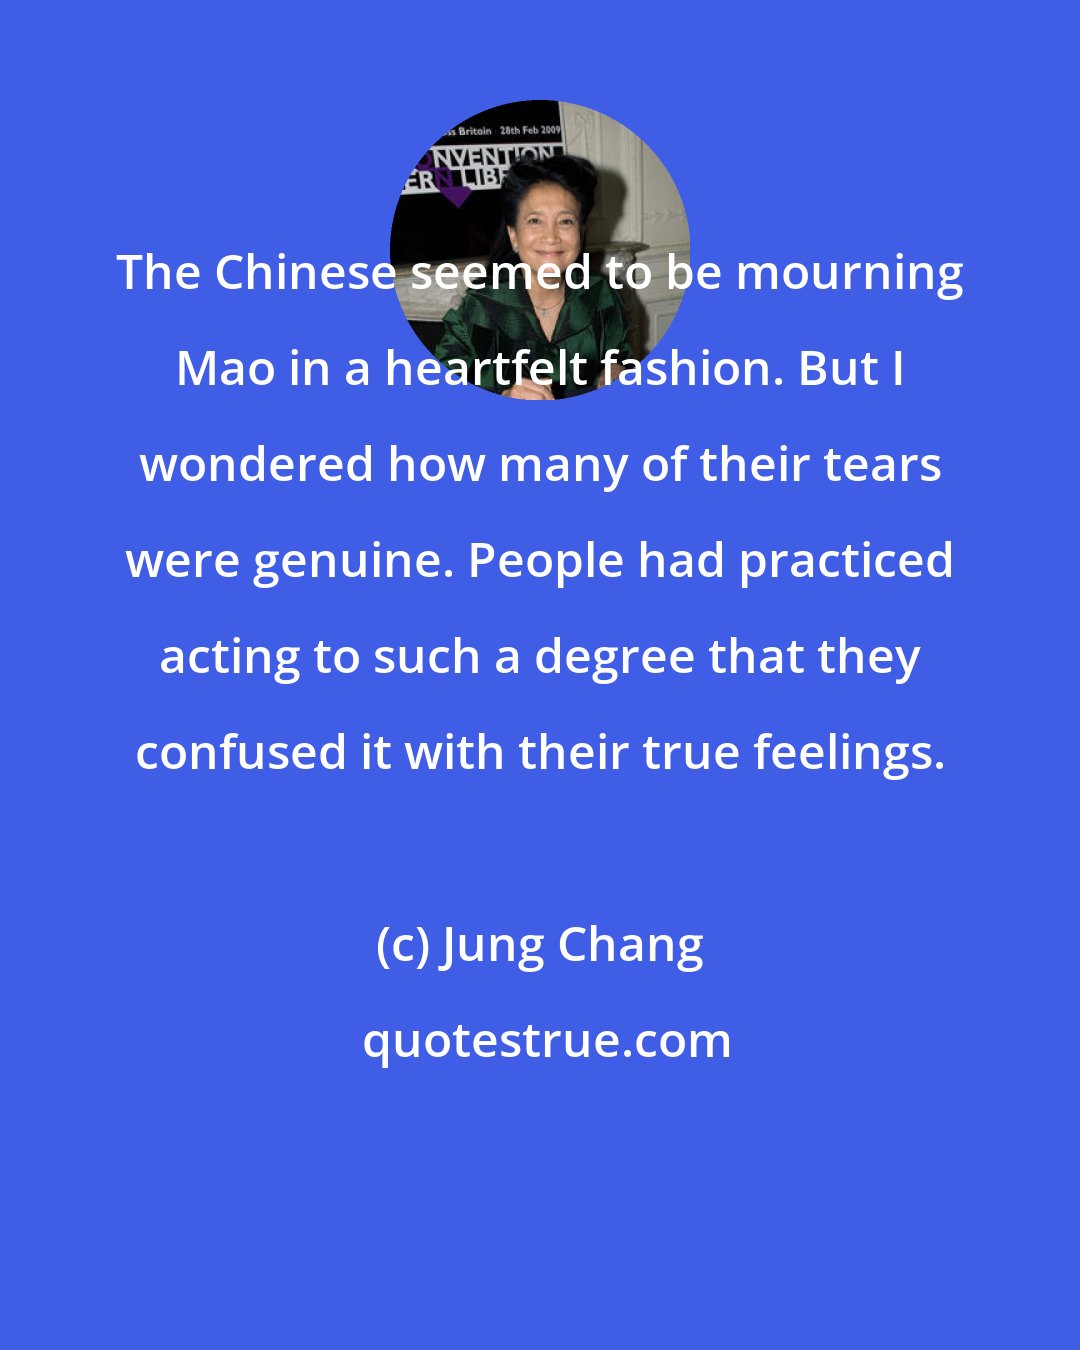 Jung Chang: The Chinese seemed to be mourning Mao in a heartfelt fashion. But I wondered how many of their tears were genuine. People had practiced acting to such a degree that they confused it with their true feelings.